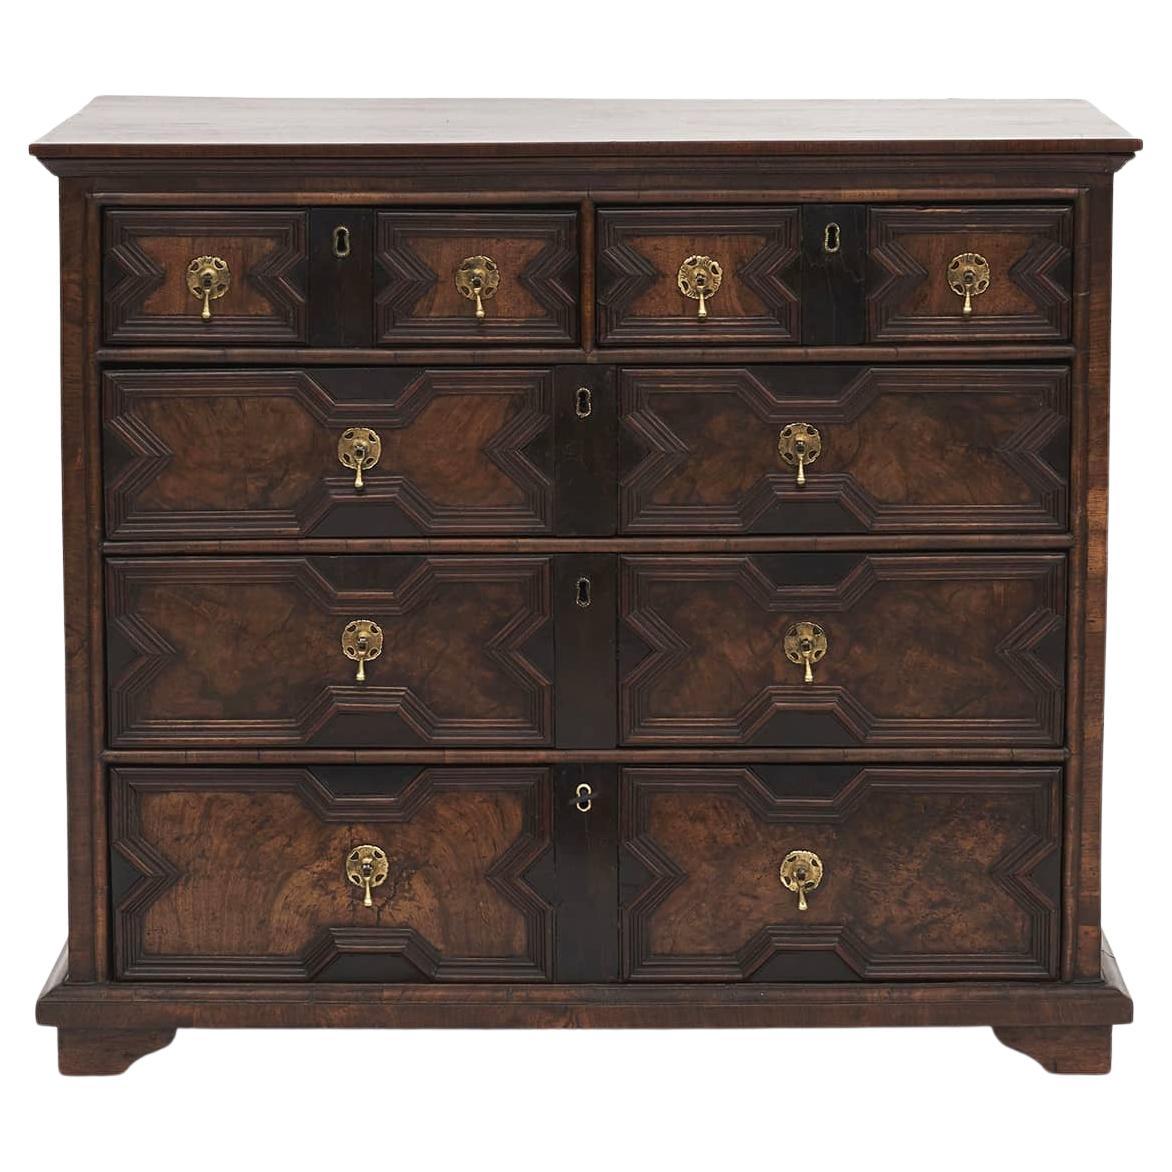 English 18th Century George I Jacobean Chest of Drawers